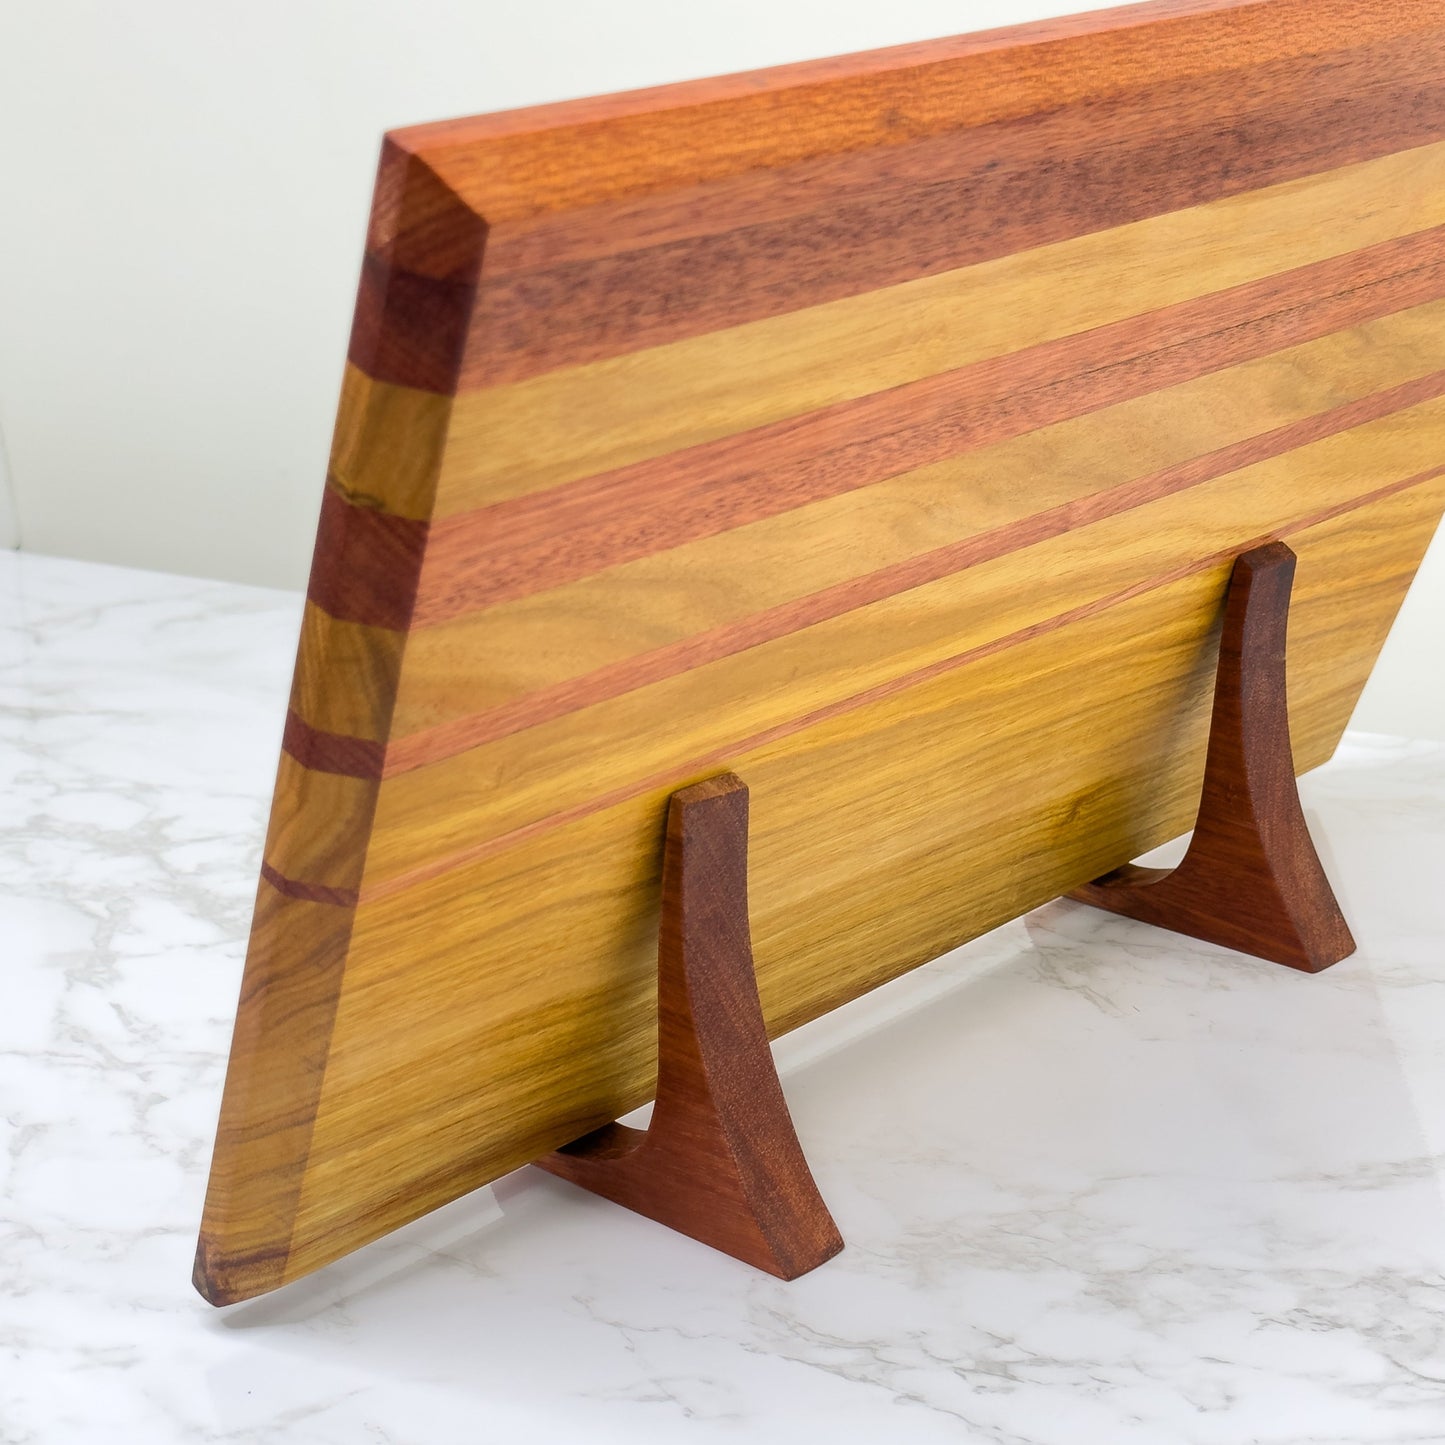 Exotic Canary & Bloodwood - Handmade Wooden Cutting Board - one-off